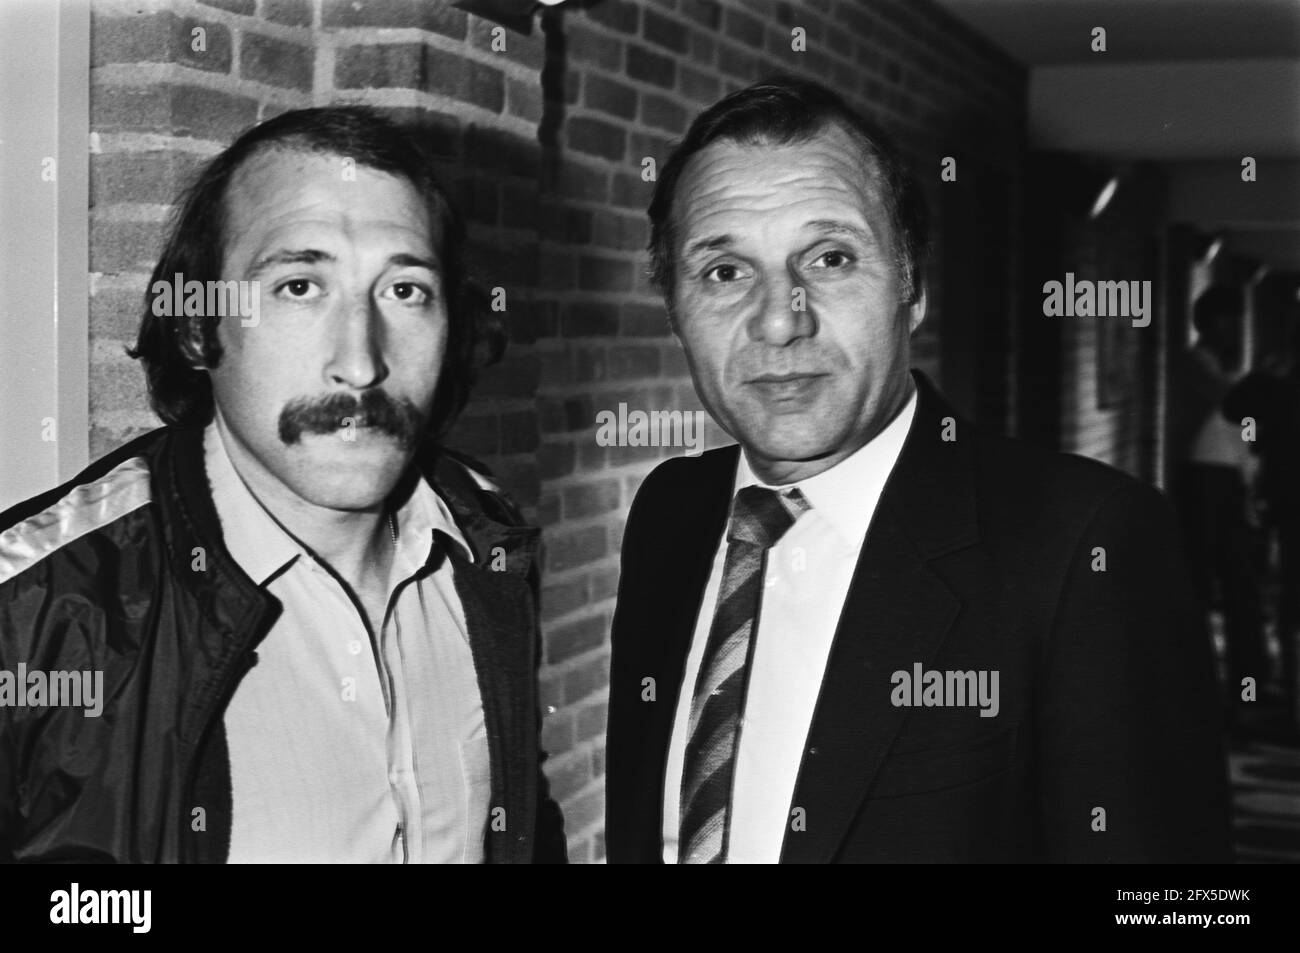 French team Sochaux in Alkmaar for semi-final toUEFA cup against AZ67, trainer Rene Hausse with Patrick Revelli, April 21, 1981, sports, trainers, soccer, The Netherlands, 20th century press agency photo, news to remember, documentary, historic photography 1945-1990, visual stories, human history of the Twentieth Century, capturing moments in time Stock Photo